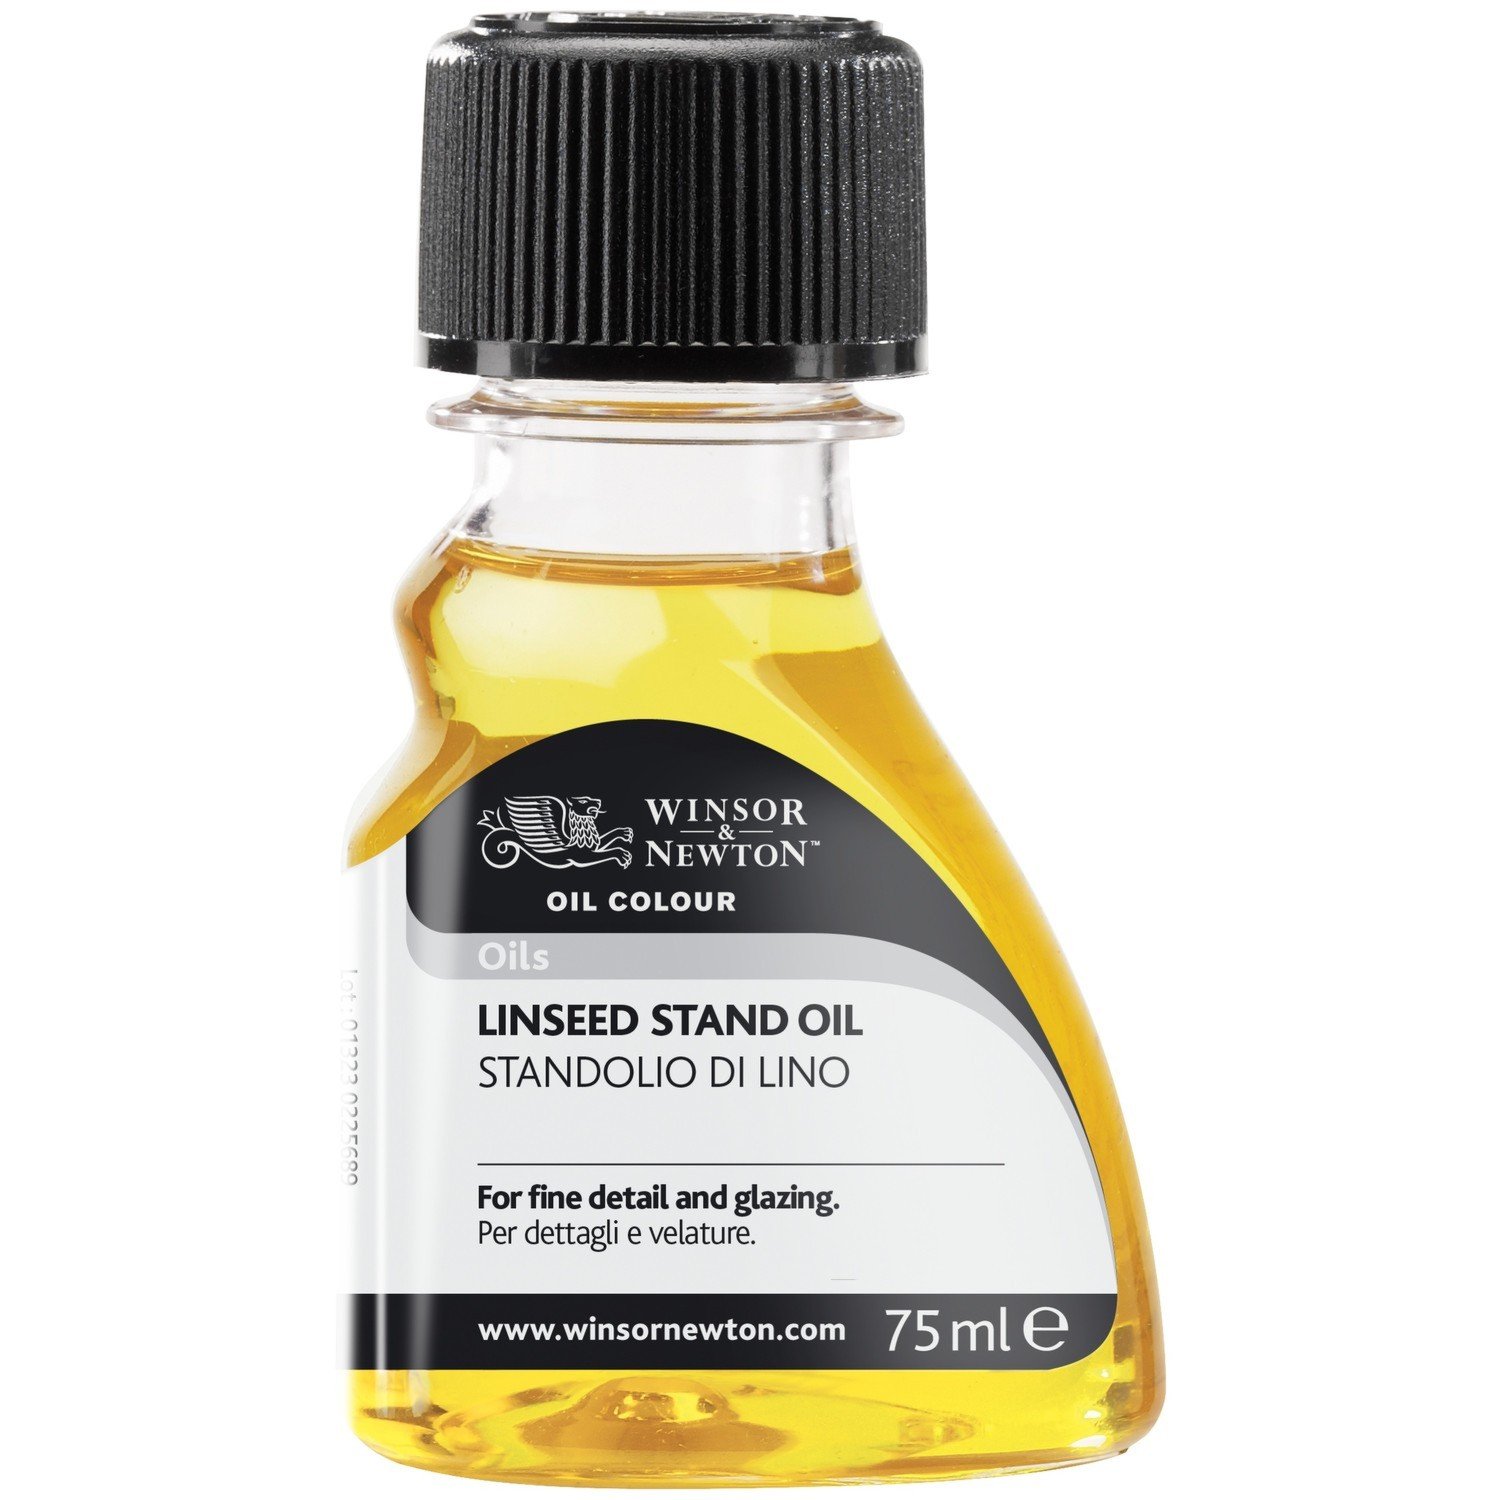 Winsor and Newton Oil Colour Linseed Stand Oil Image